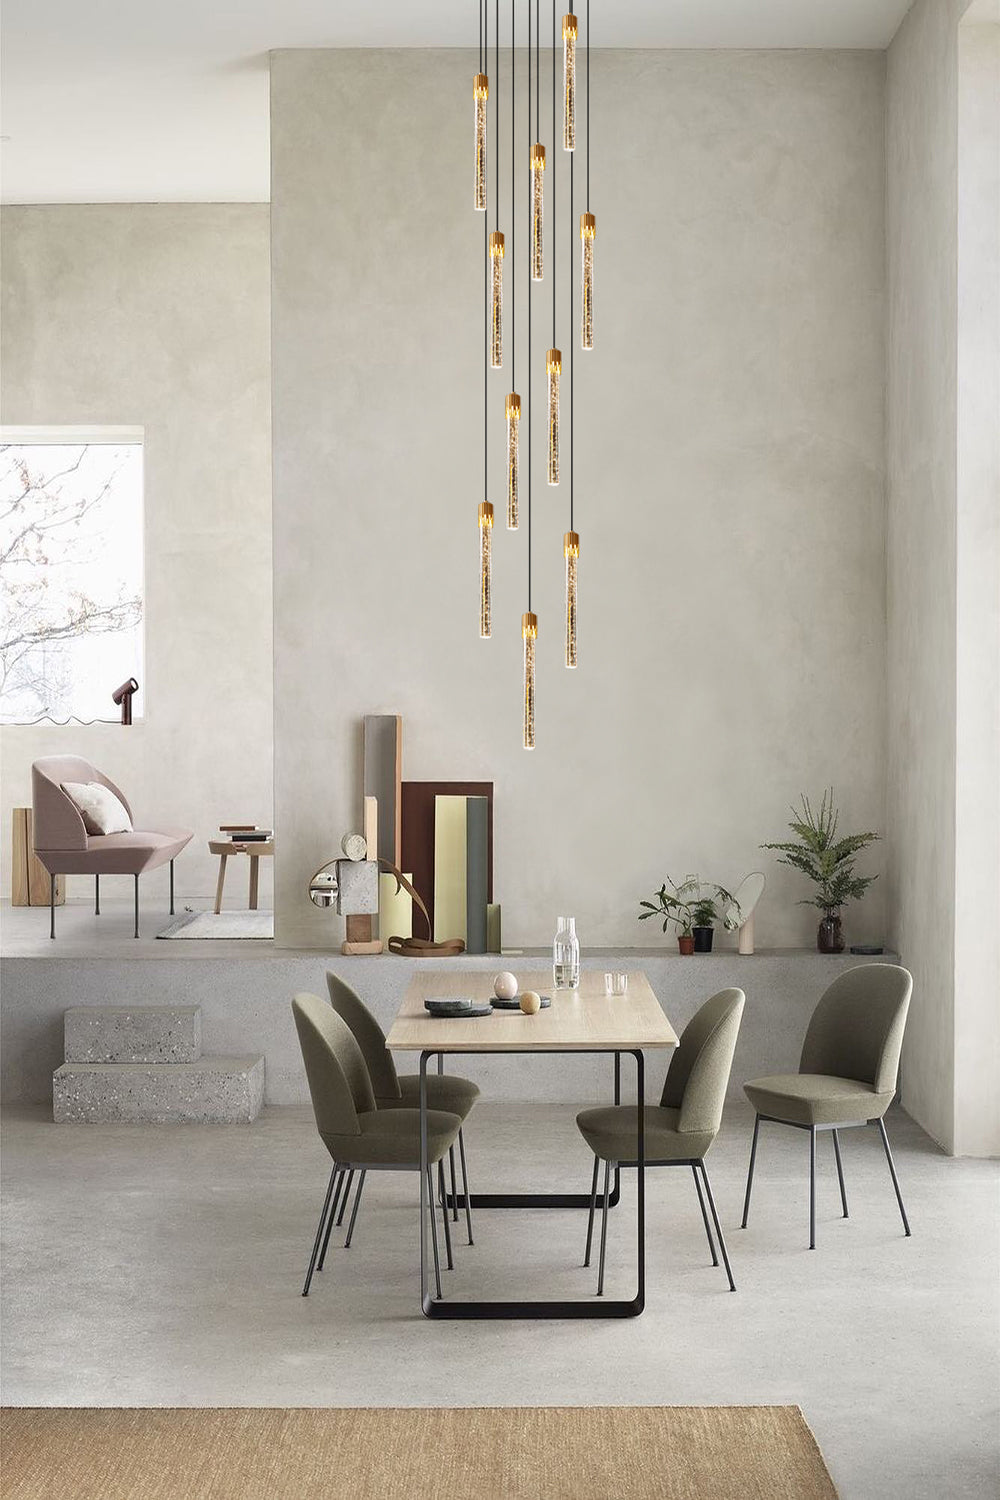 Gold Bubble Crystal Pendant Light hanging above the dining table